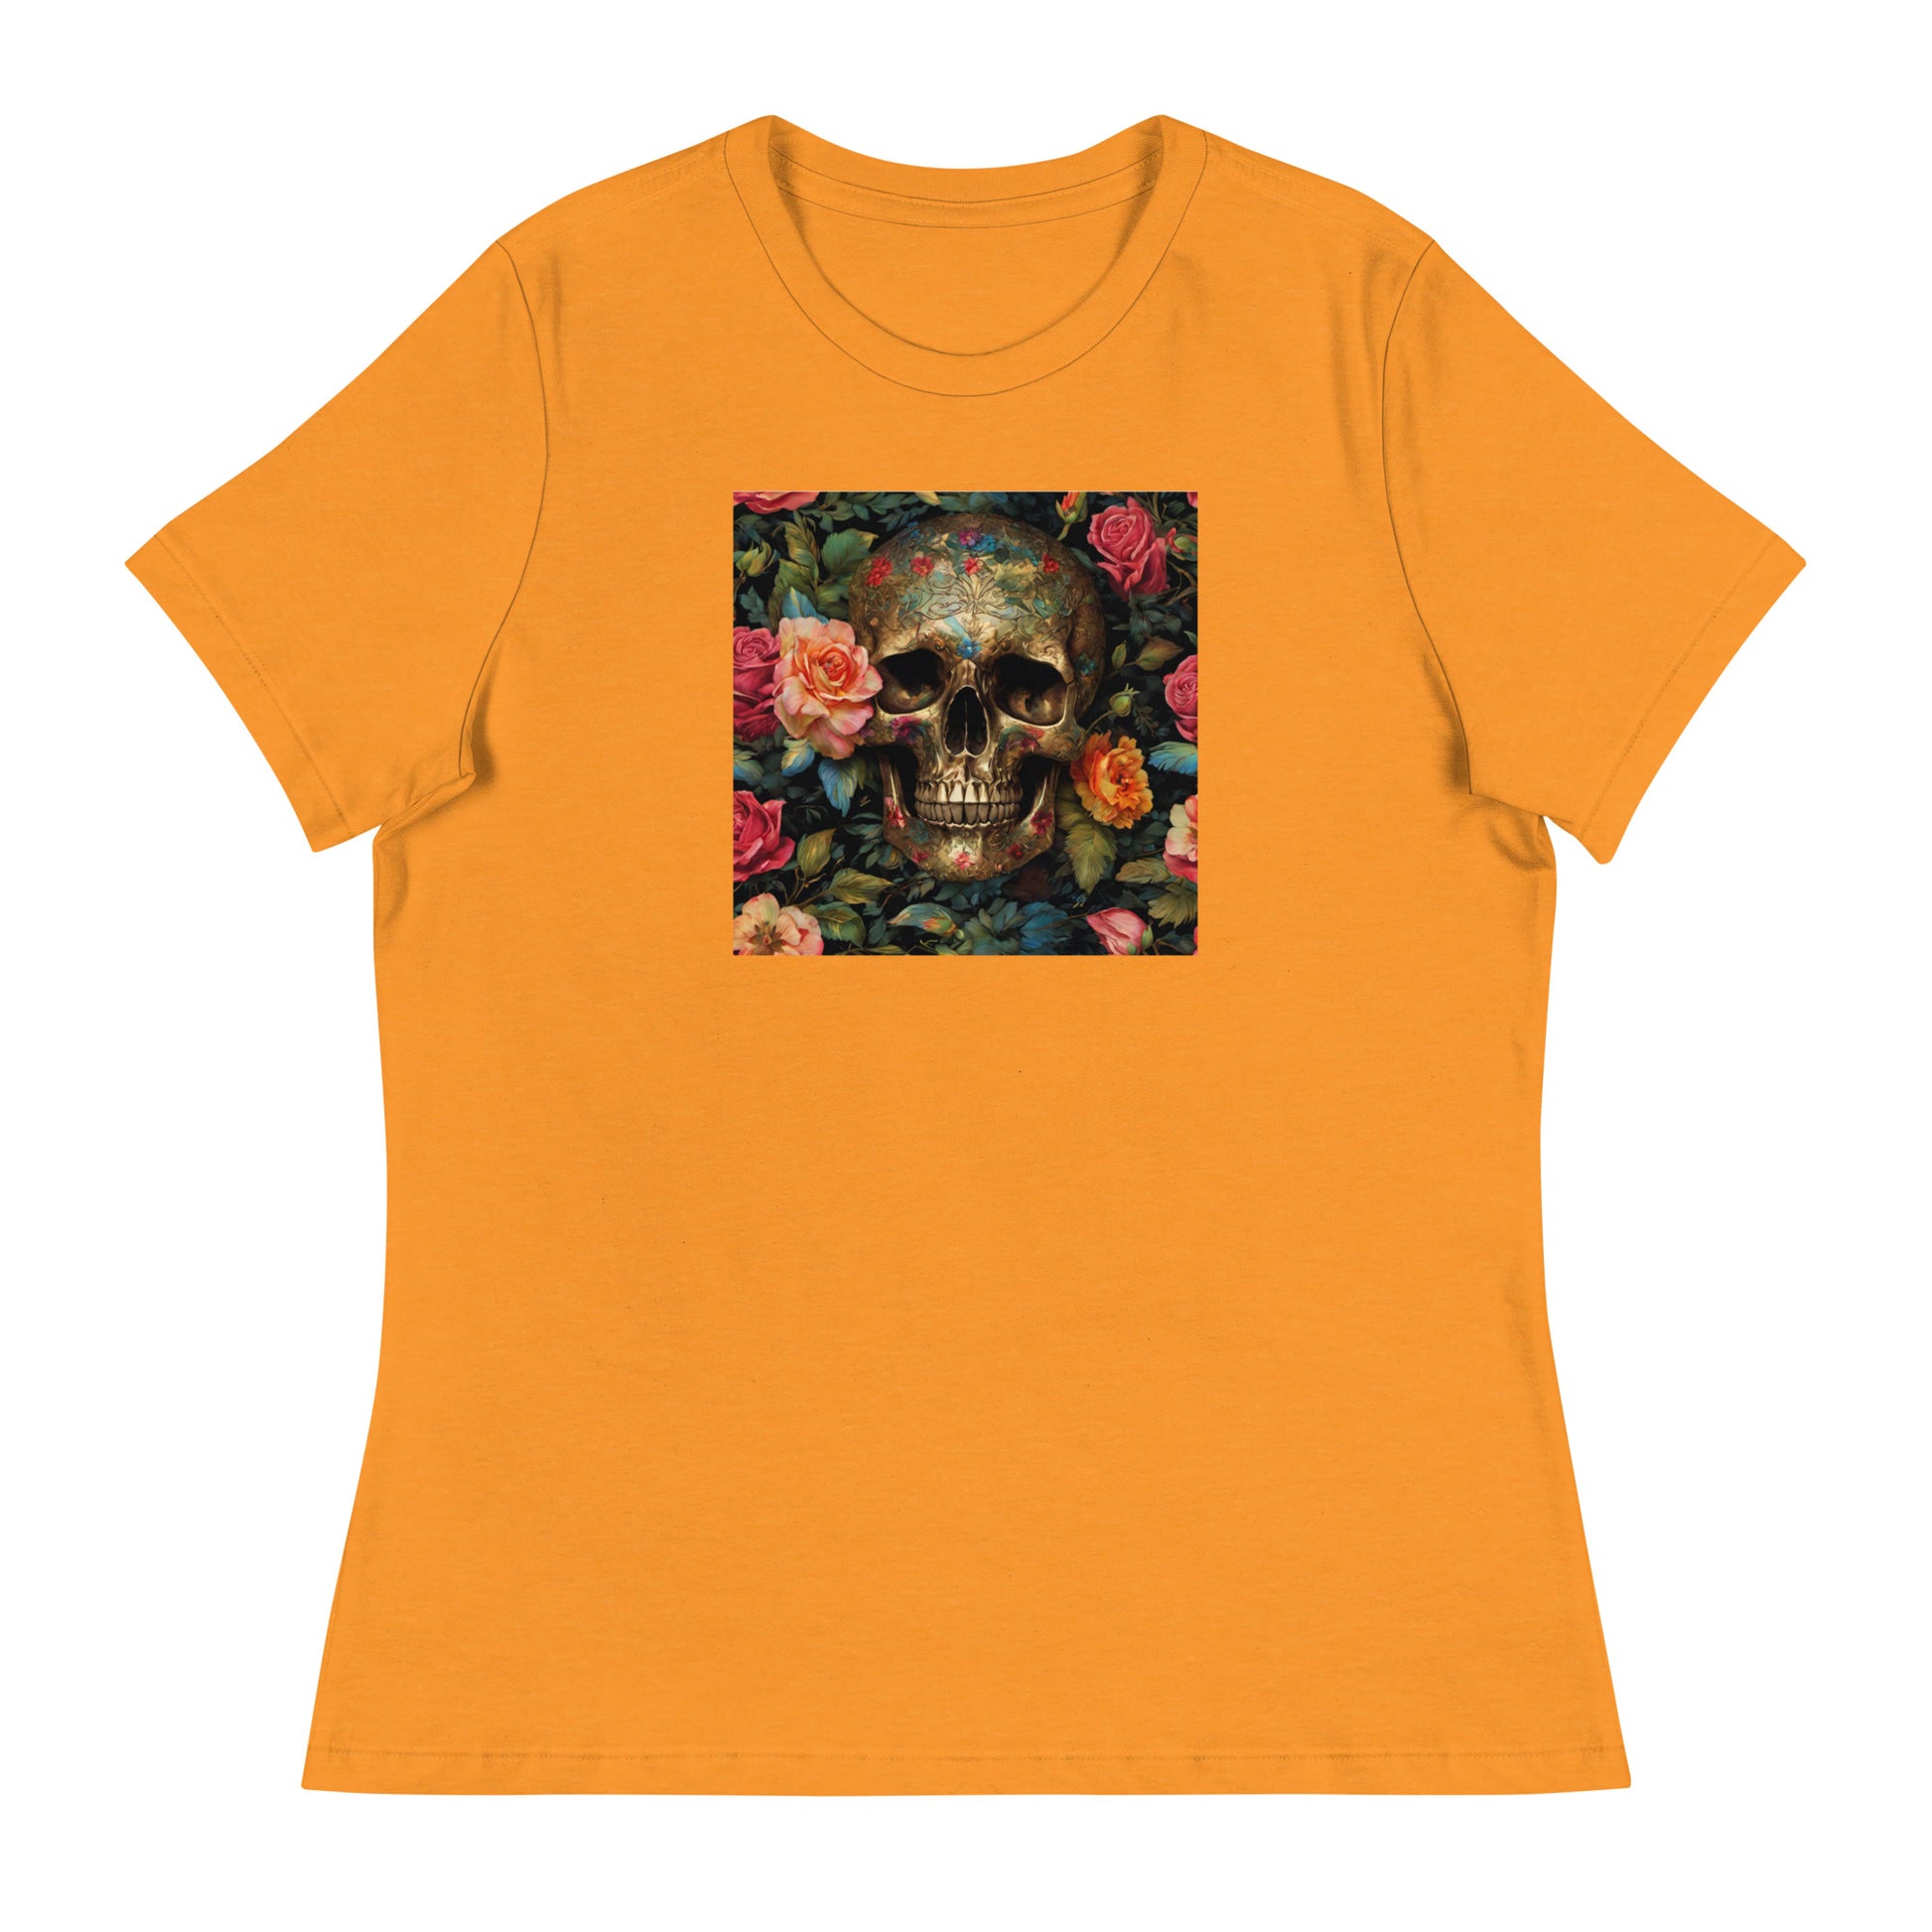 Skull and Roses Graphic Women's T-Shirt Heather Marmalade